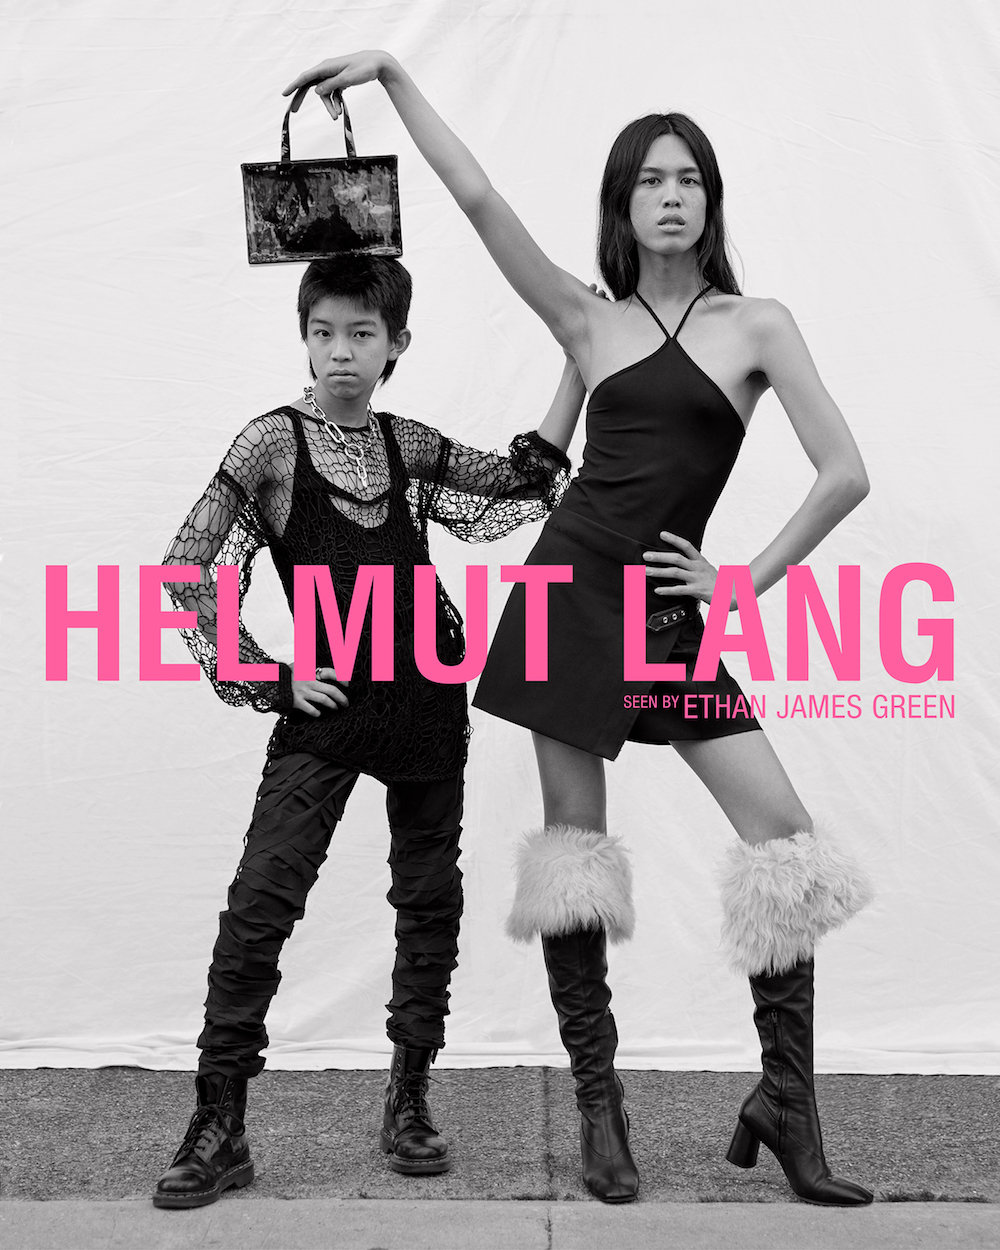 Older people are the stars of Helmut Lang's new campaign - HIGHXTAR.